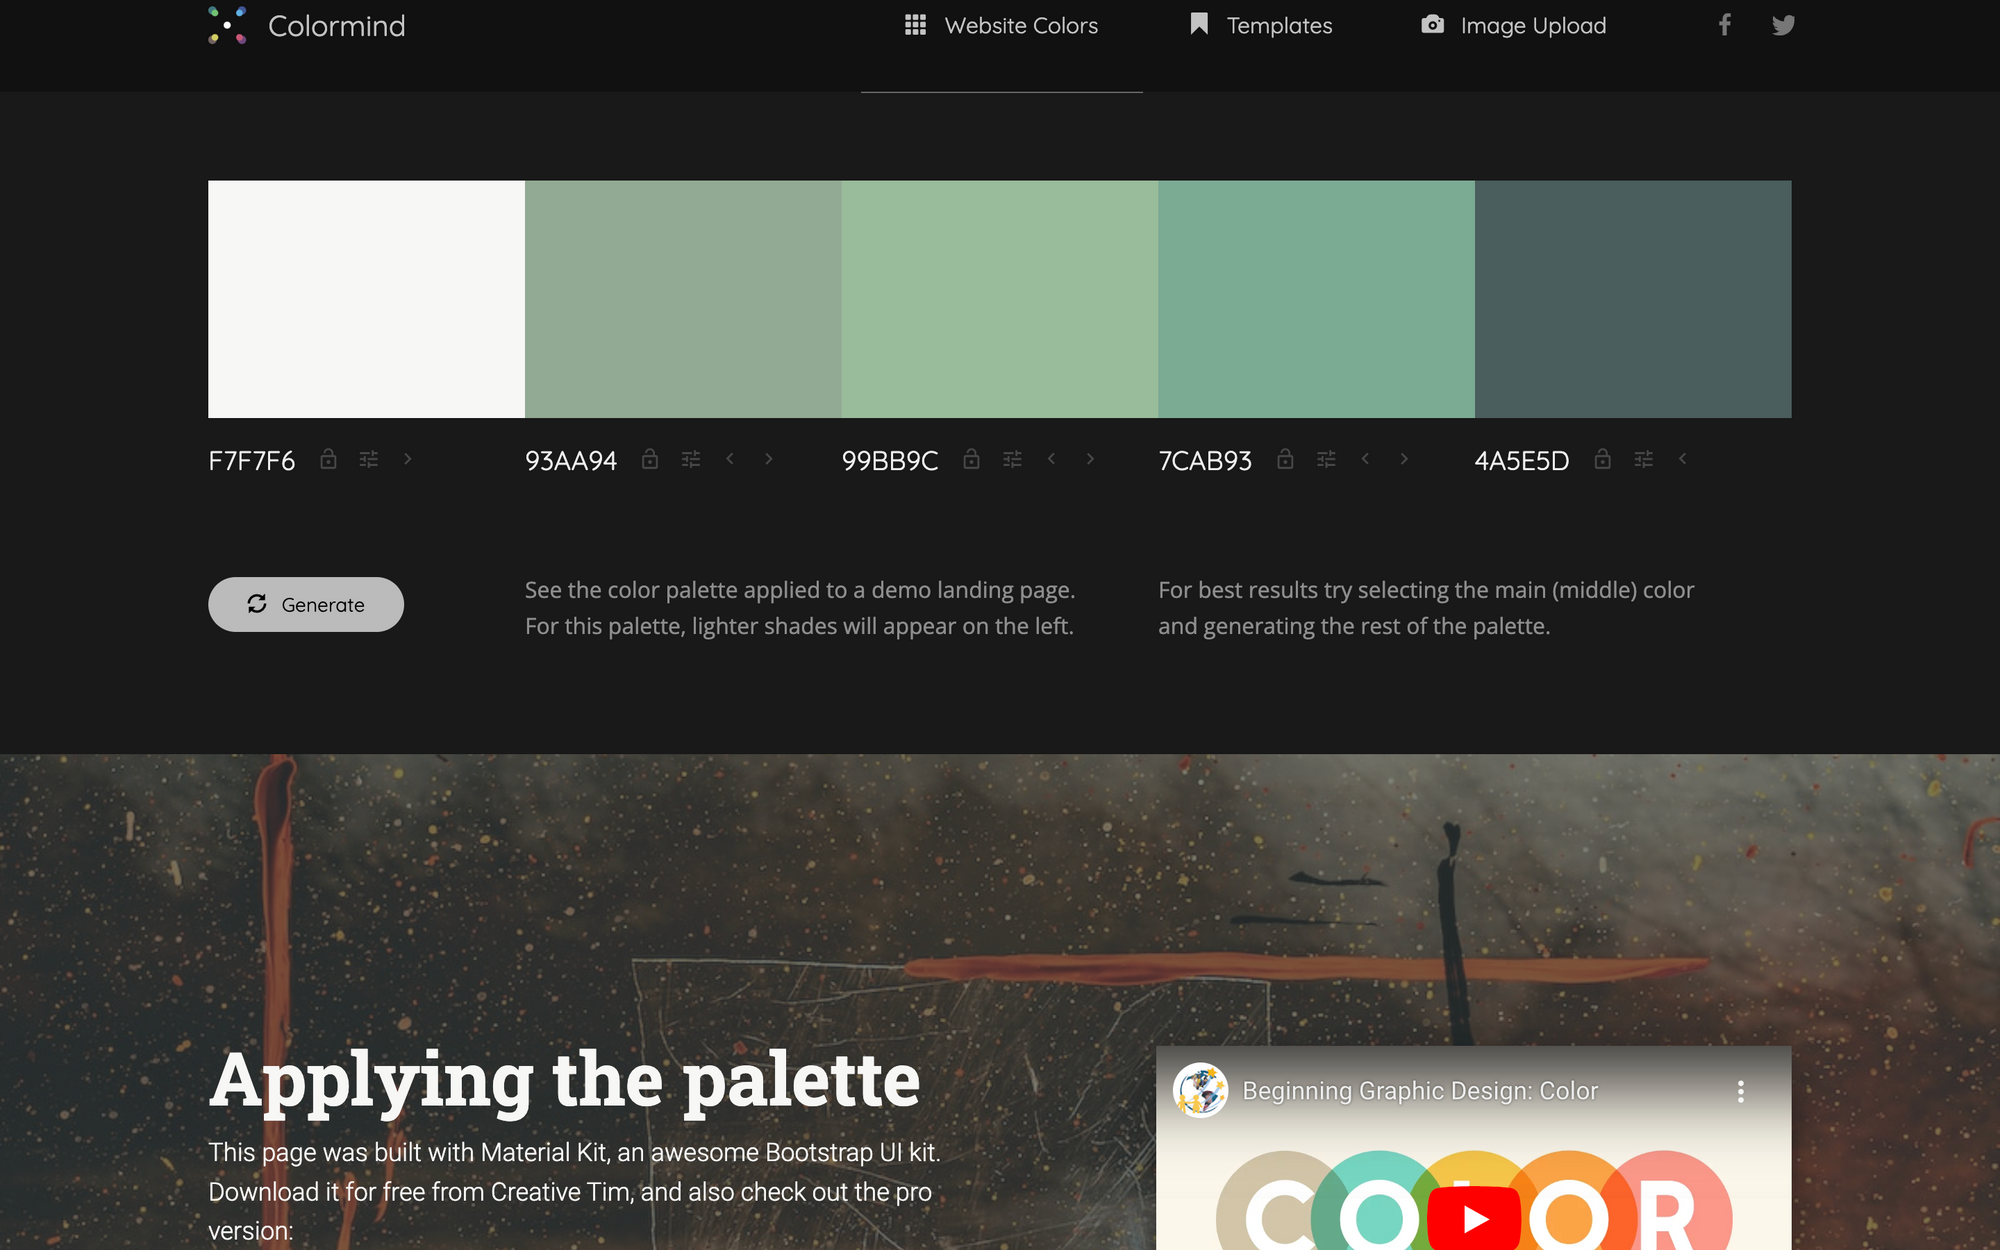 5 Trends for Best Website Design (2022) blog by Bubble - color themes